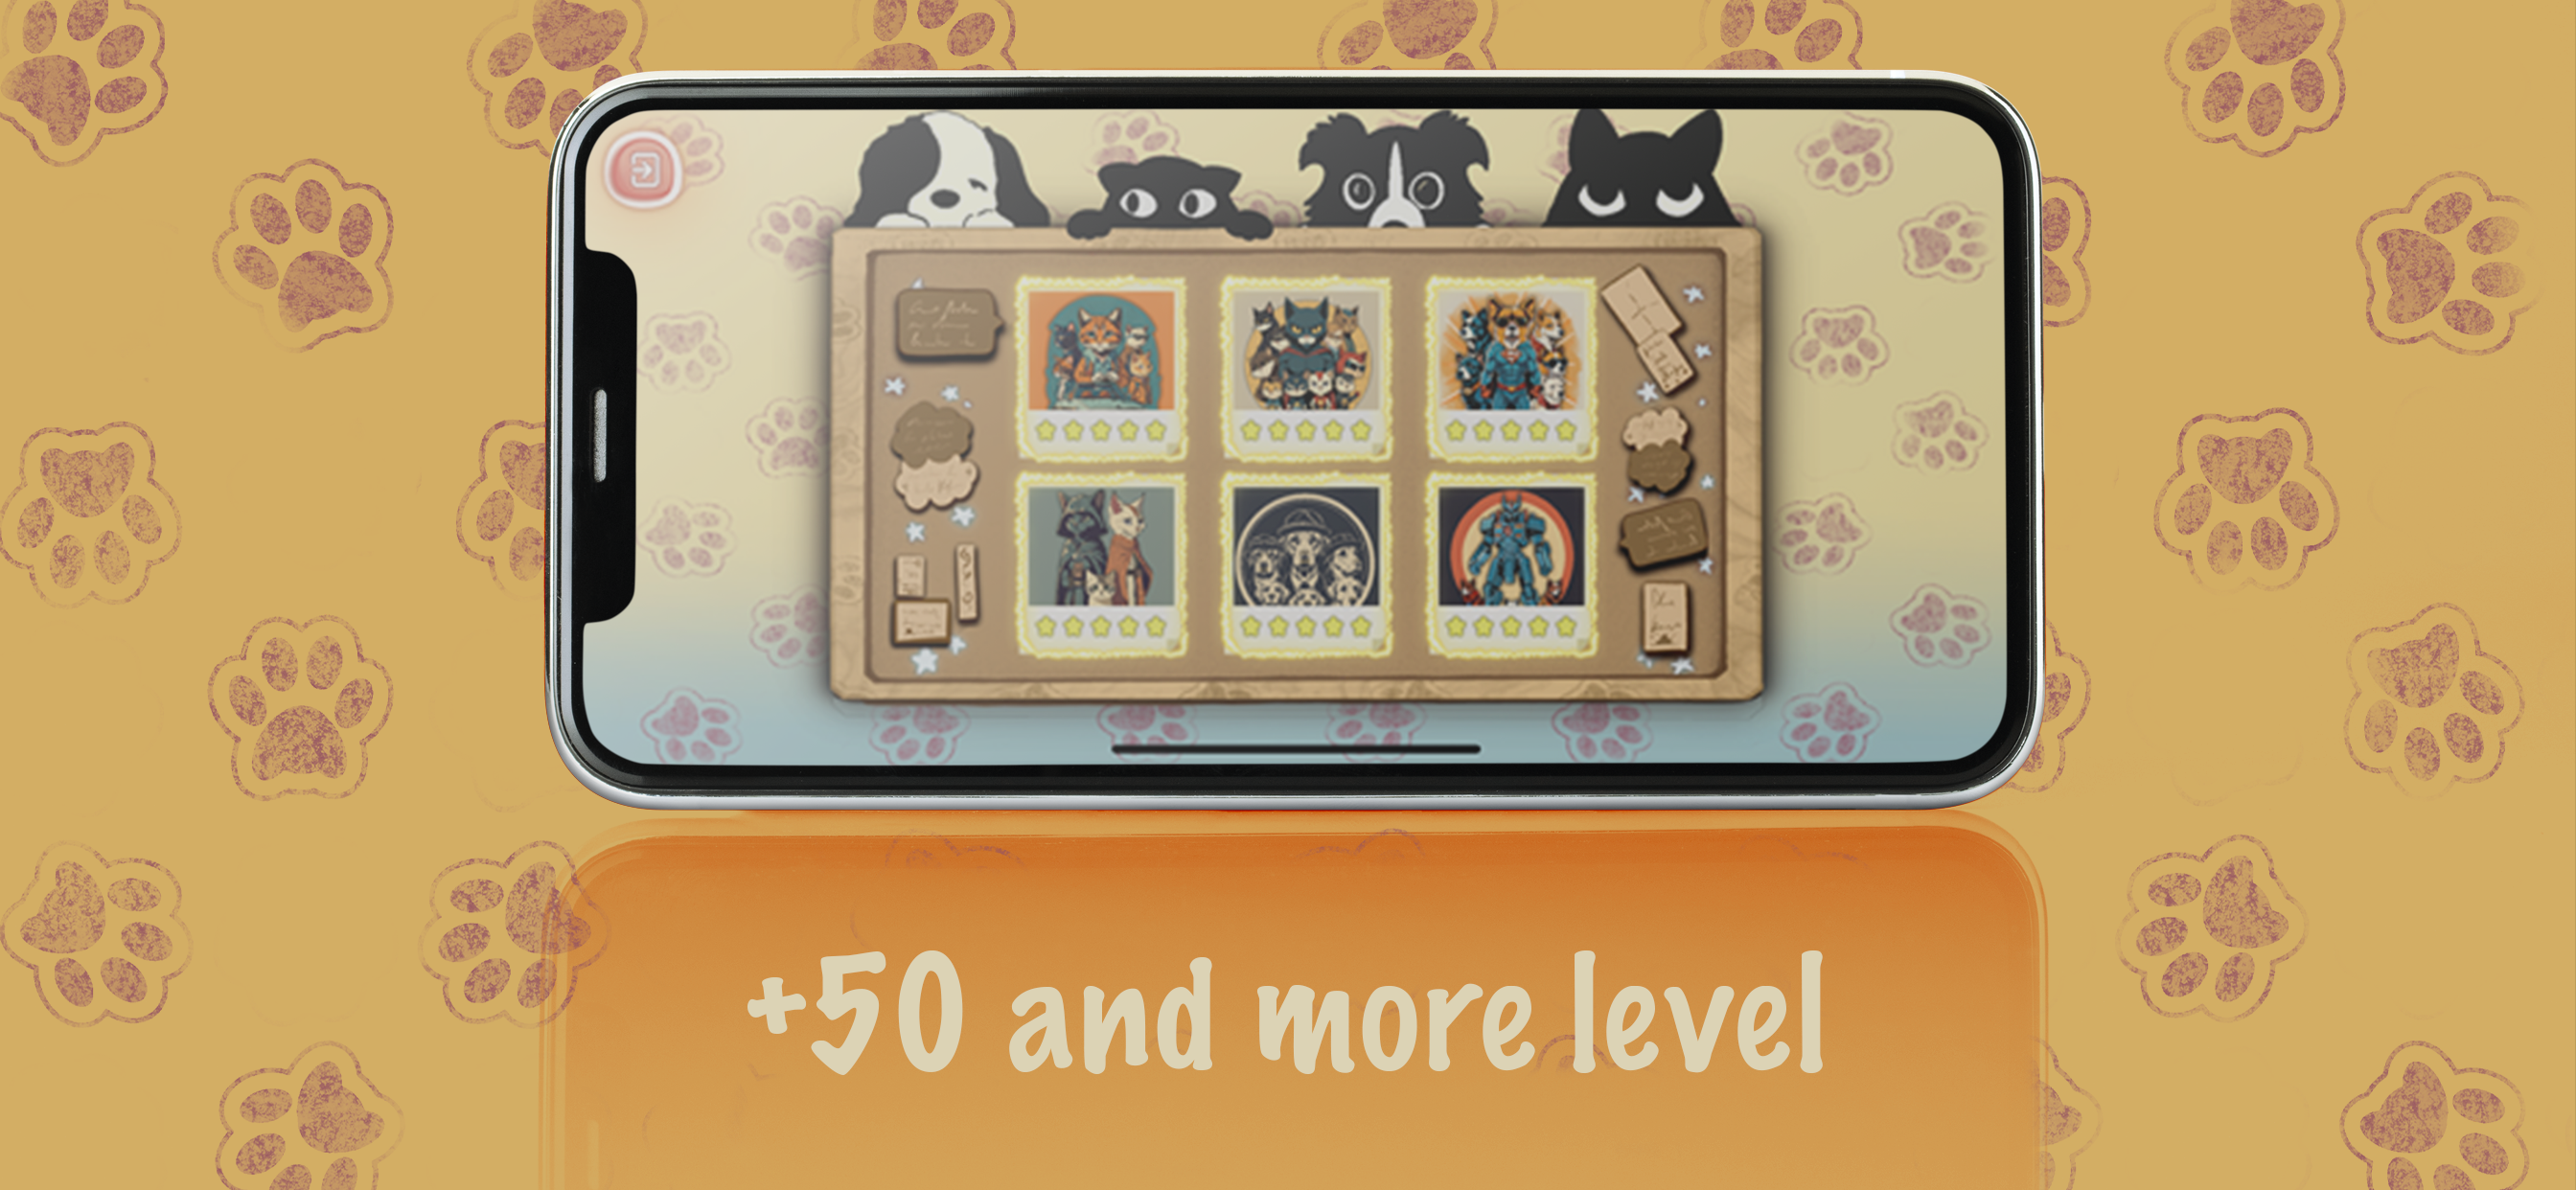 Cats & Dogs Puzzle Mania screenshot game